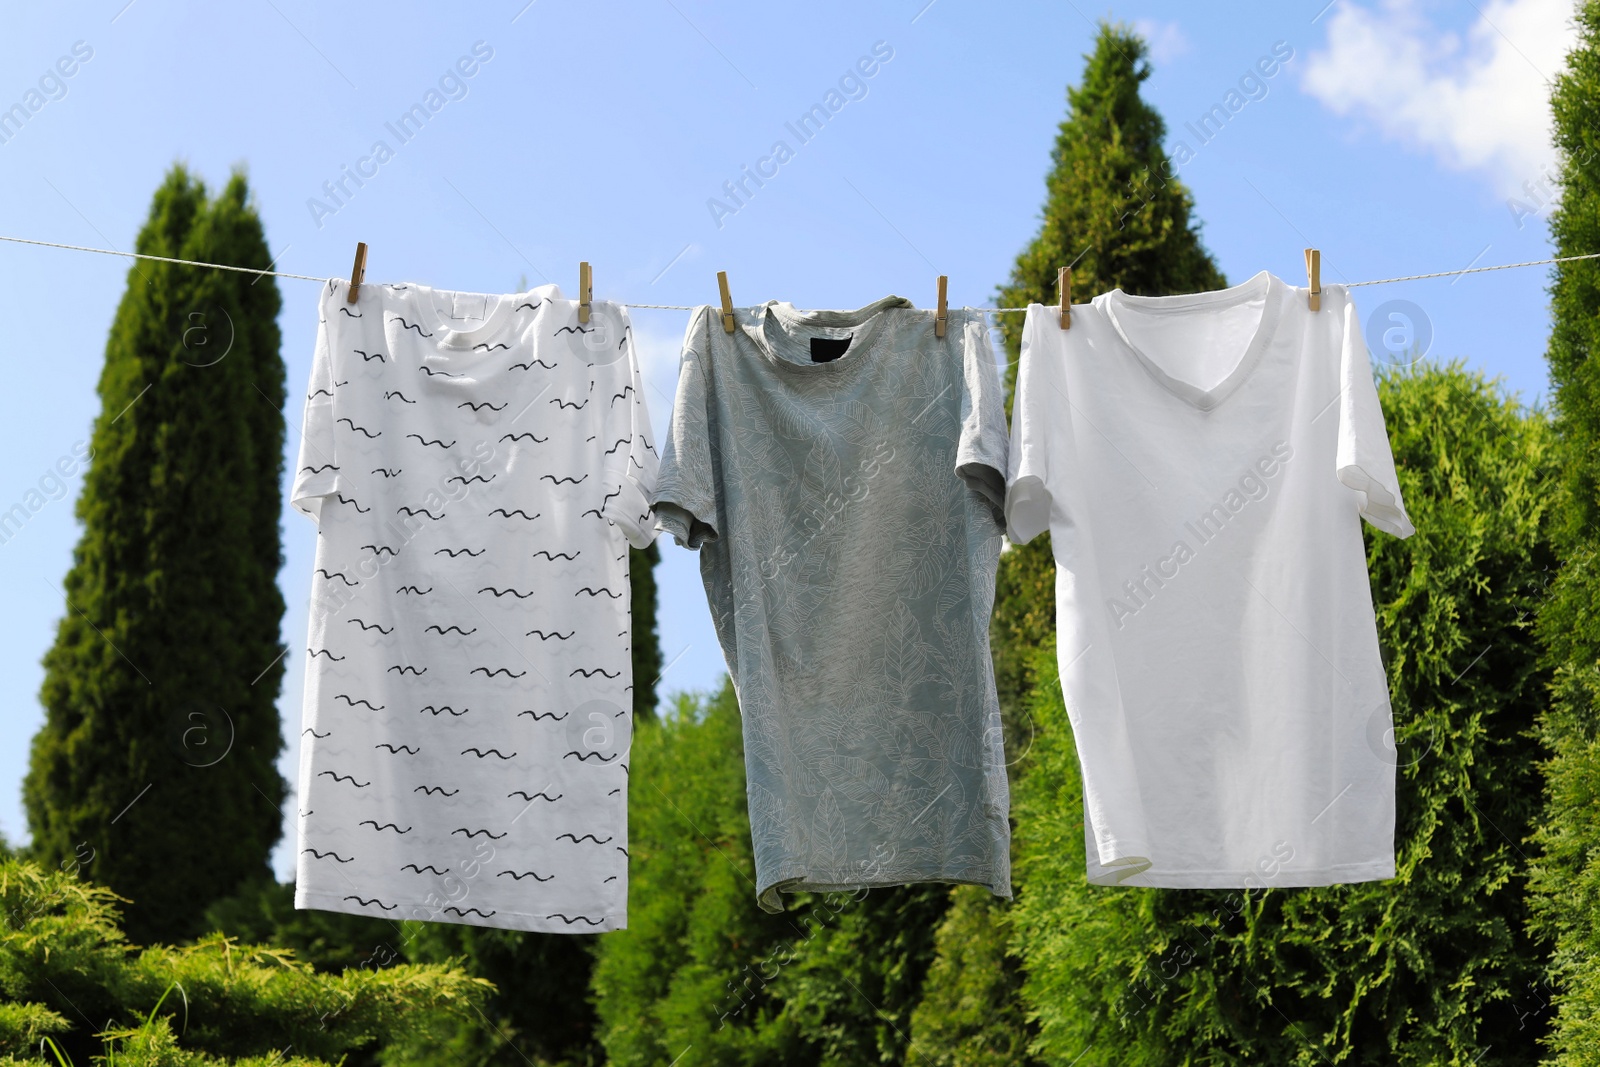 Photo of Washing line with clean clothes in garden. Drying laundry outside